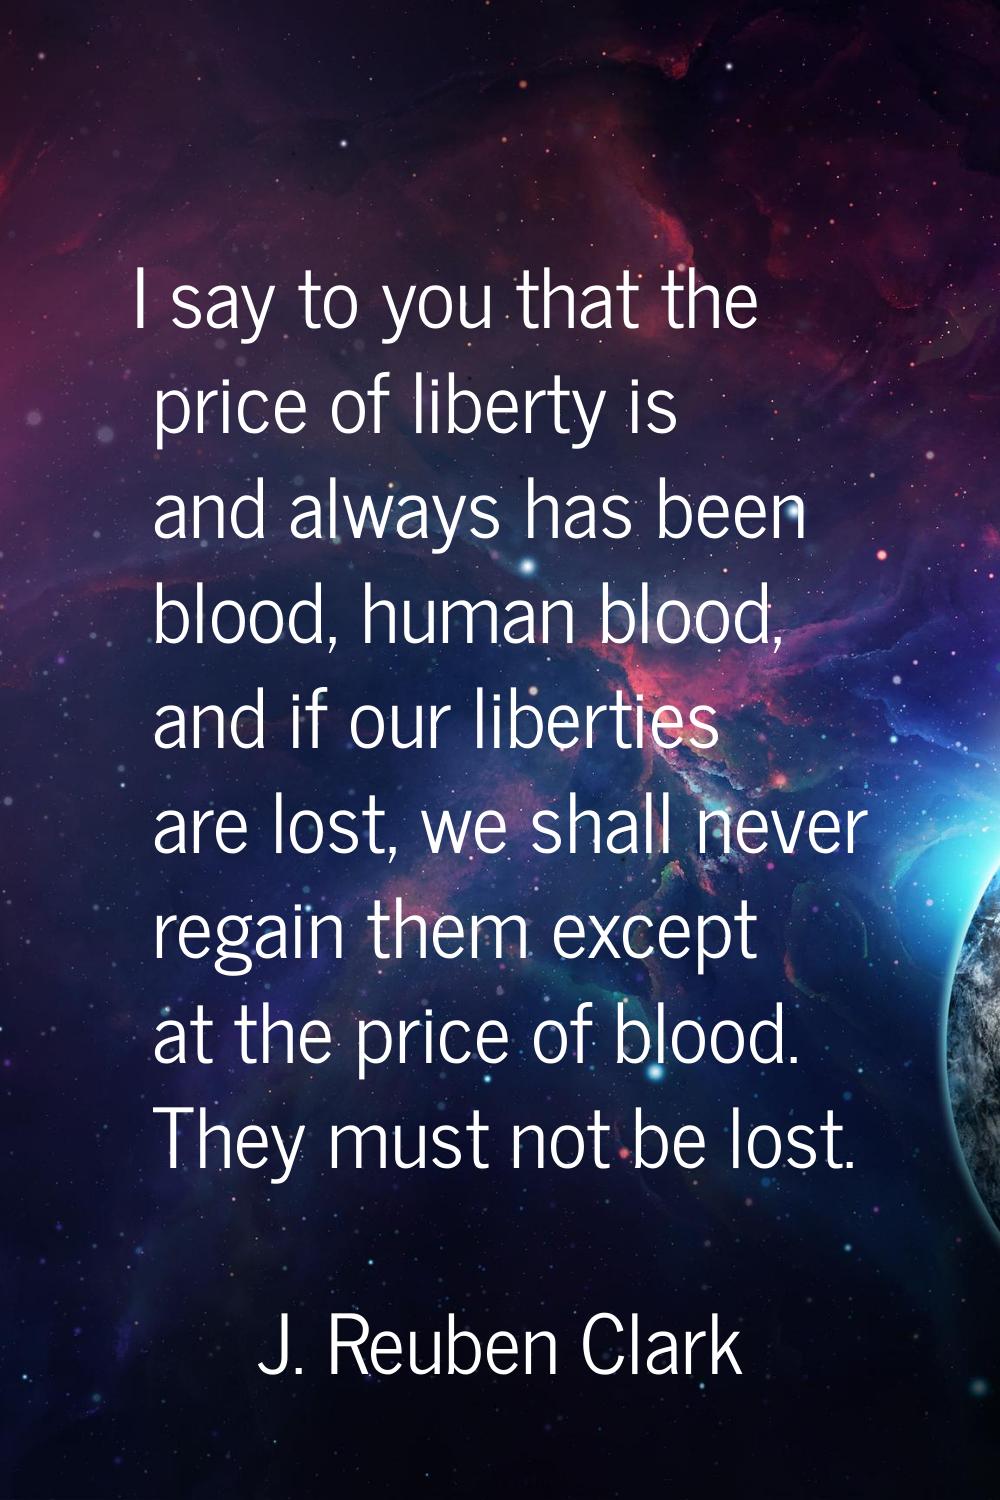 I say to you that the price of liberty is and always has been blood, human blood, and if our libert